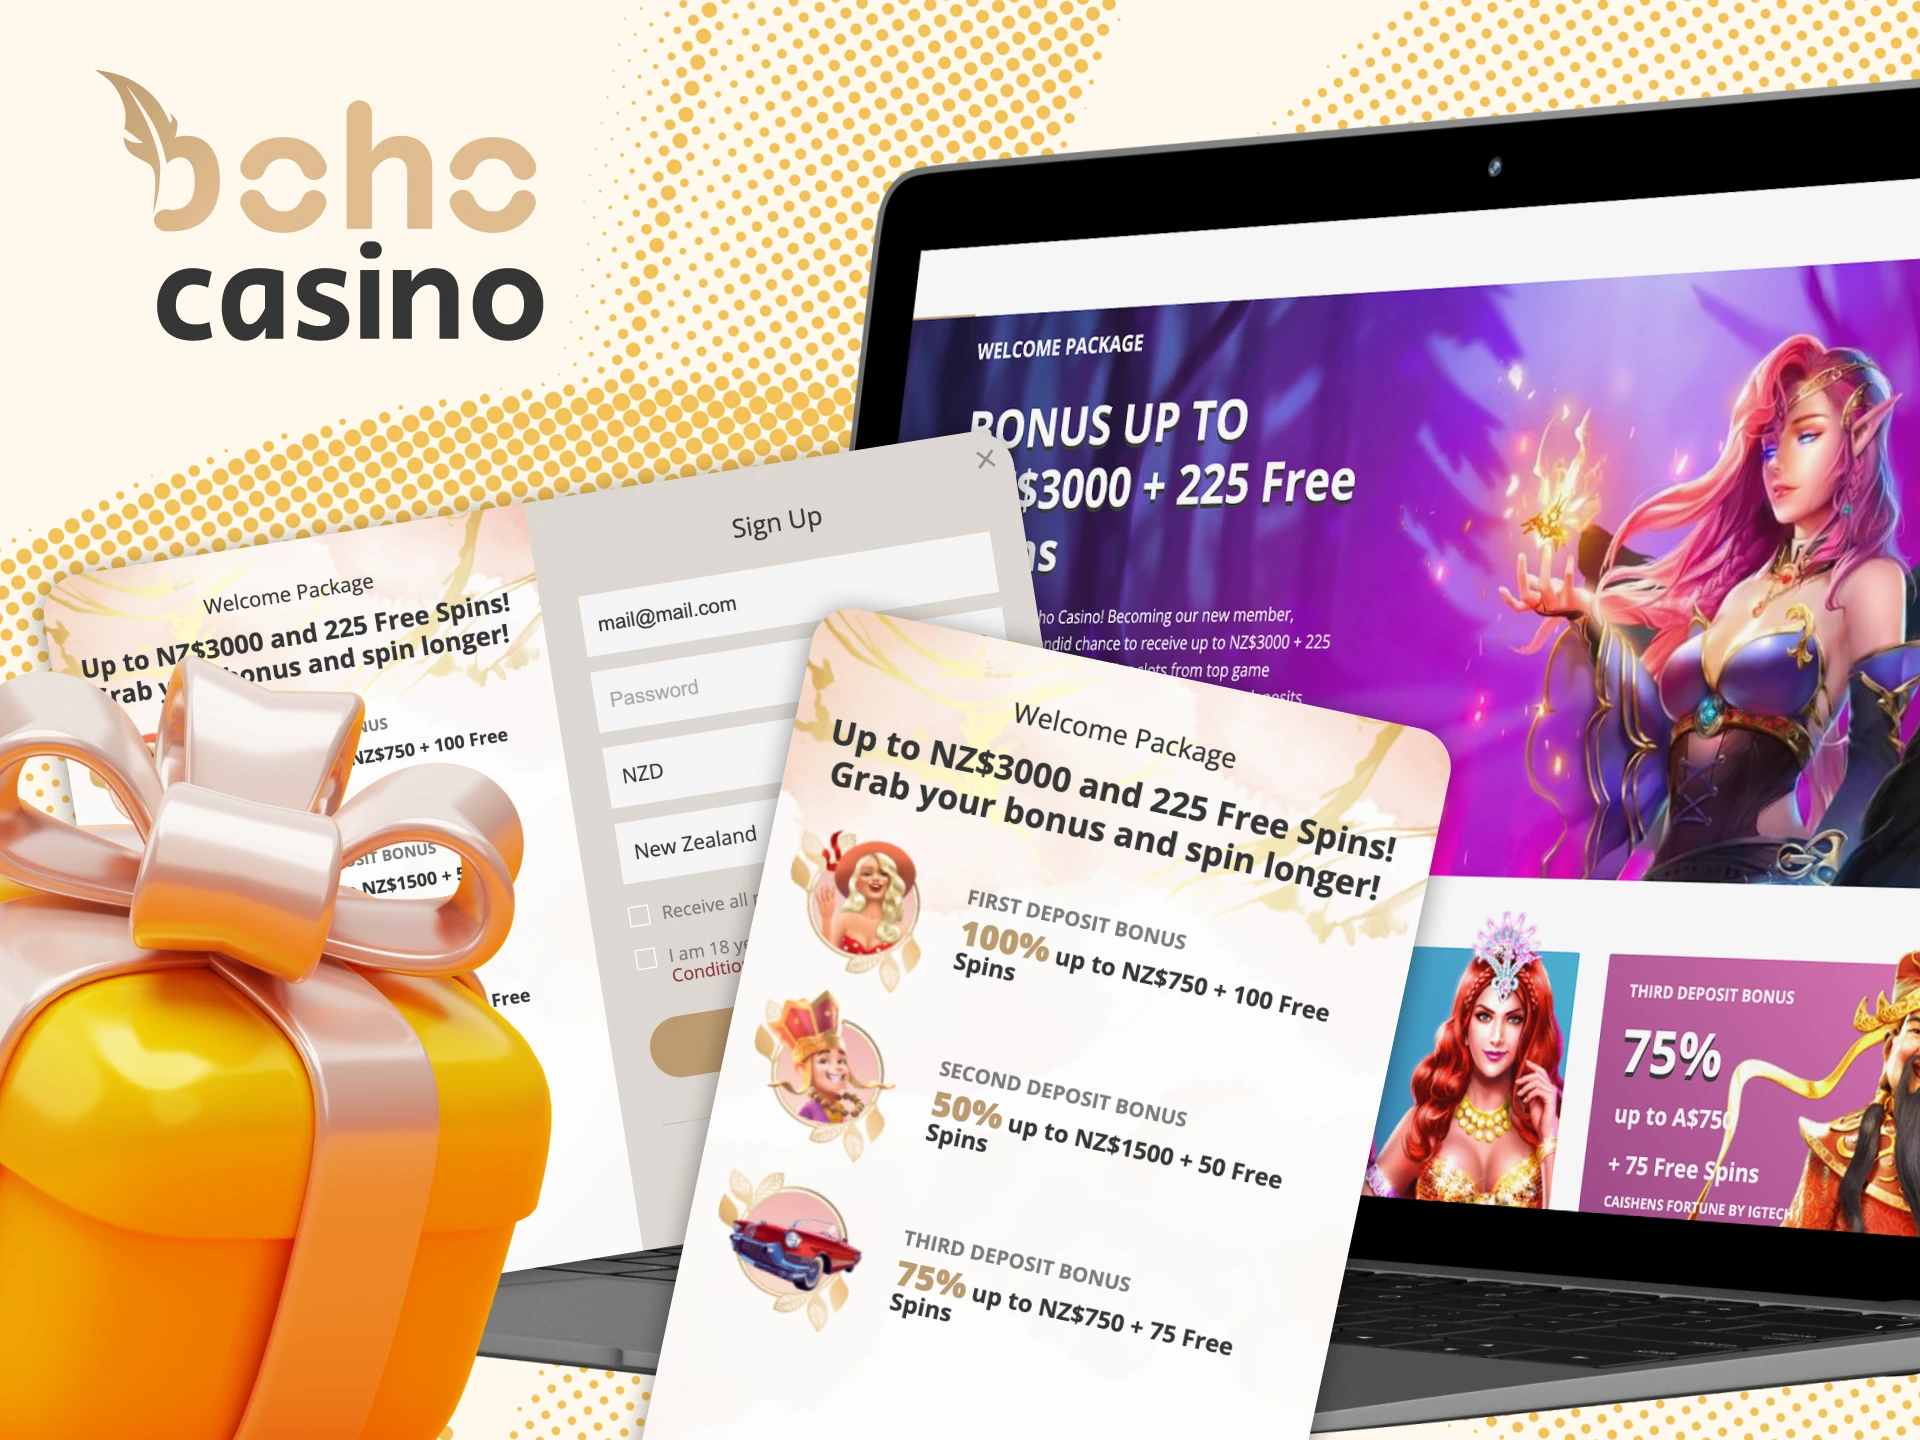 Add the Boho Casino Promo Code in the special window and activate it.